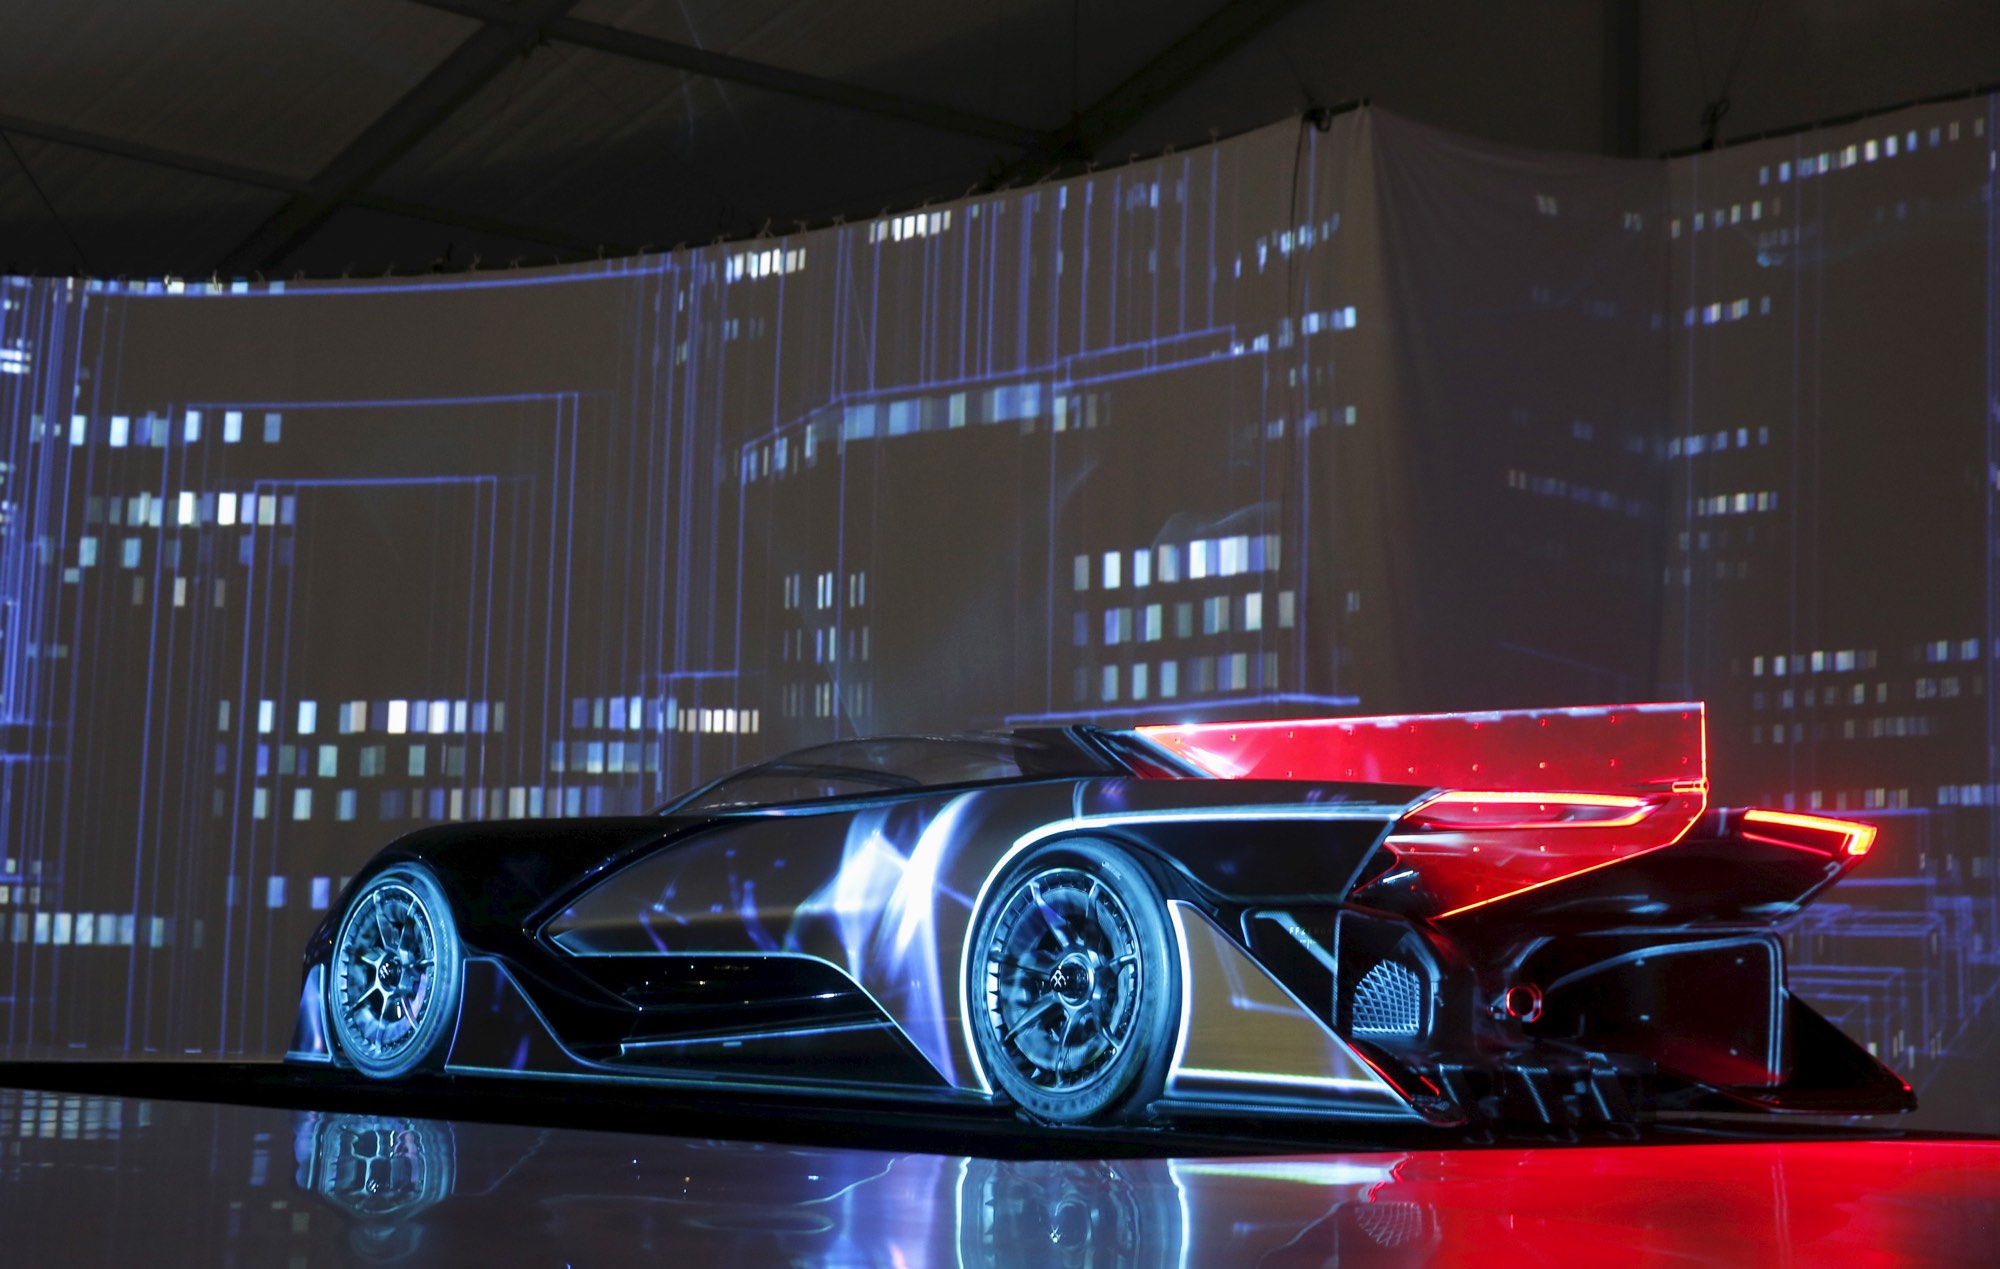 The Faraday Future FFZERO1 electric concept car is unveiled. REUTERS